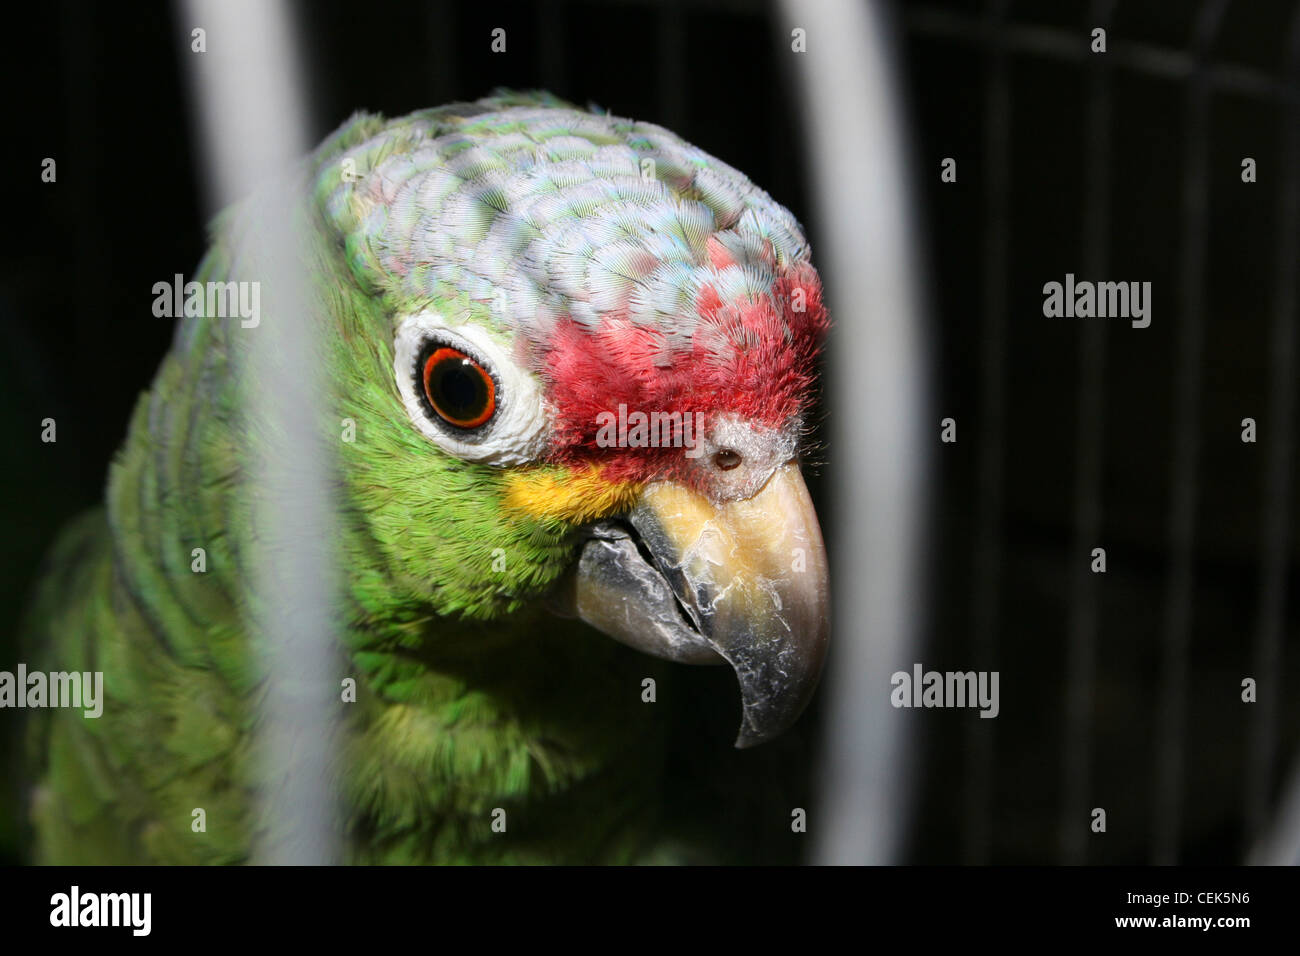 Caged Red-lored Parrot Amazona autumnalis Stock Photo